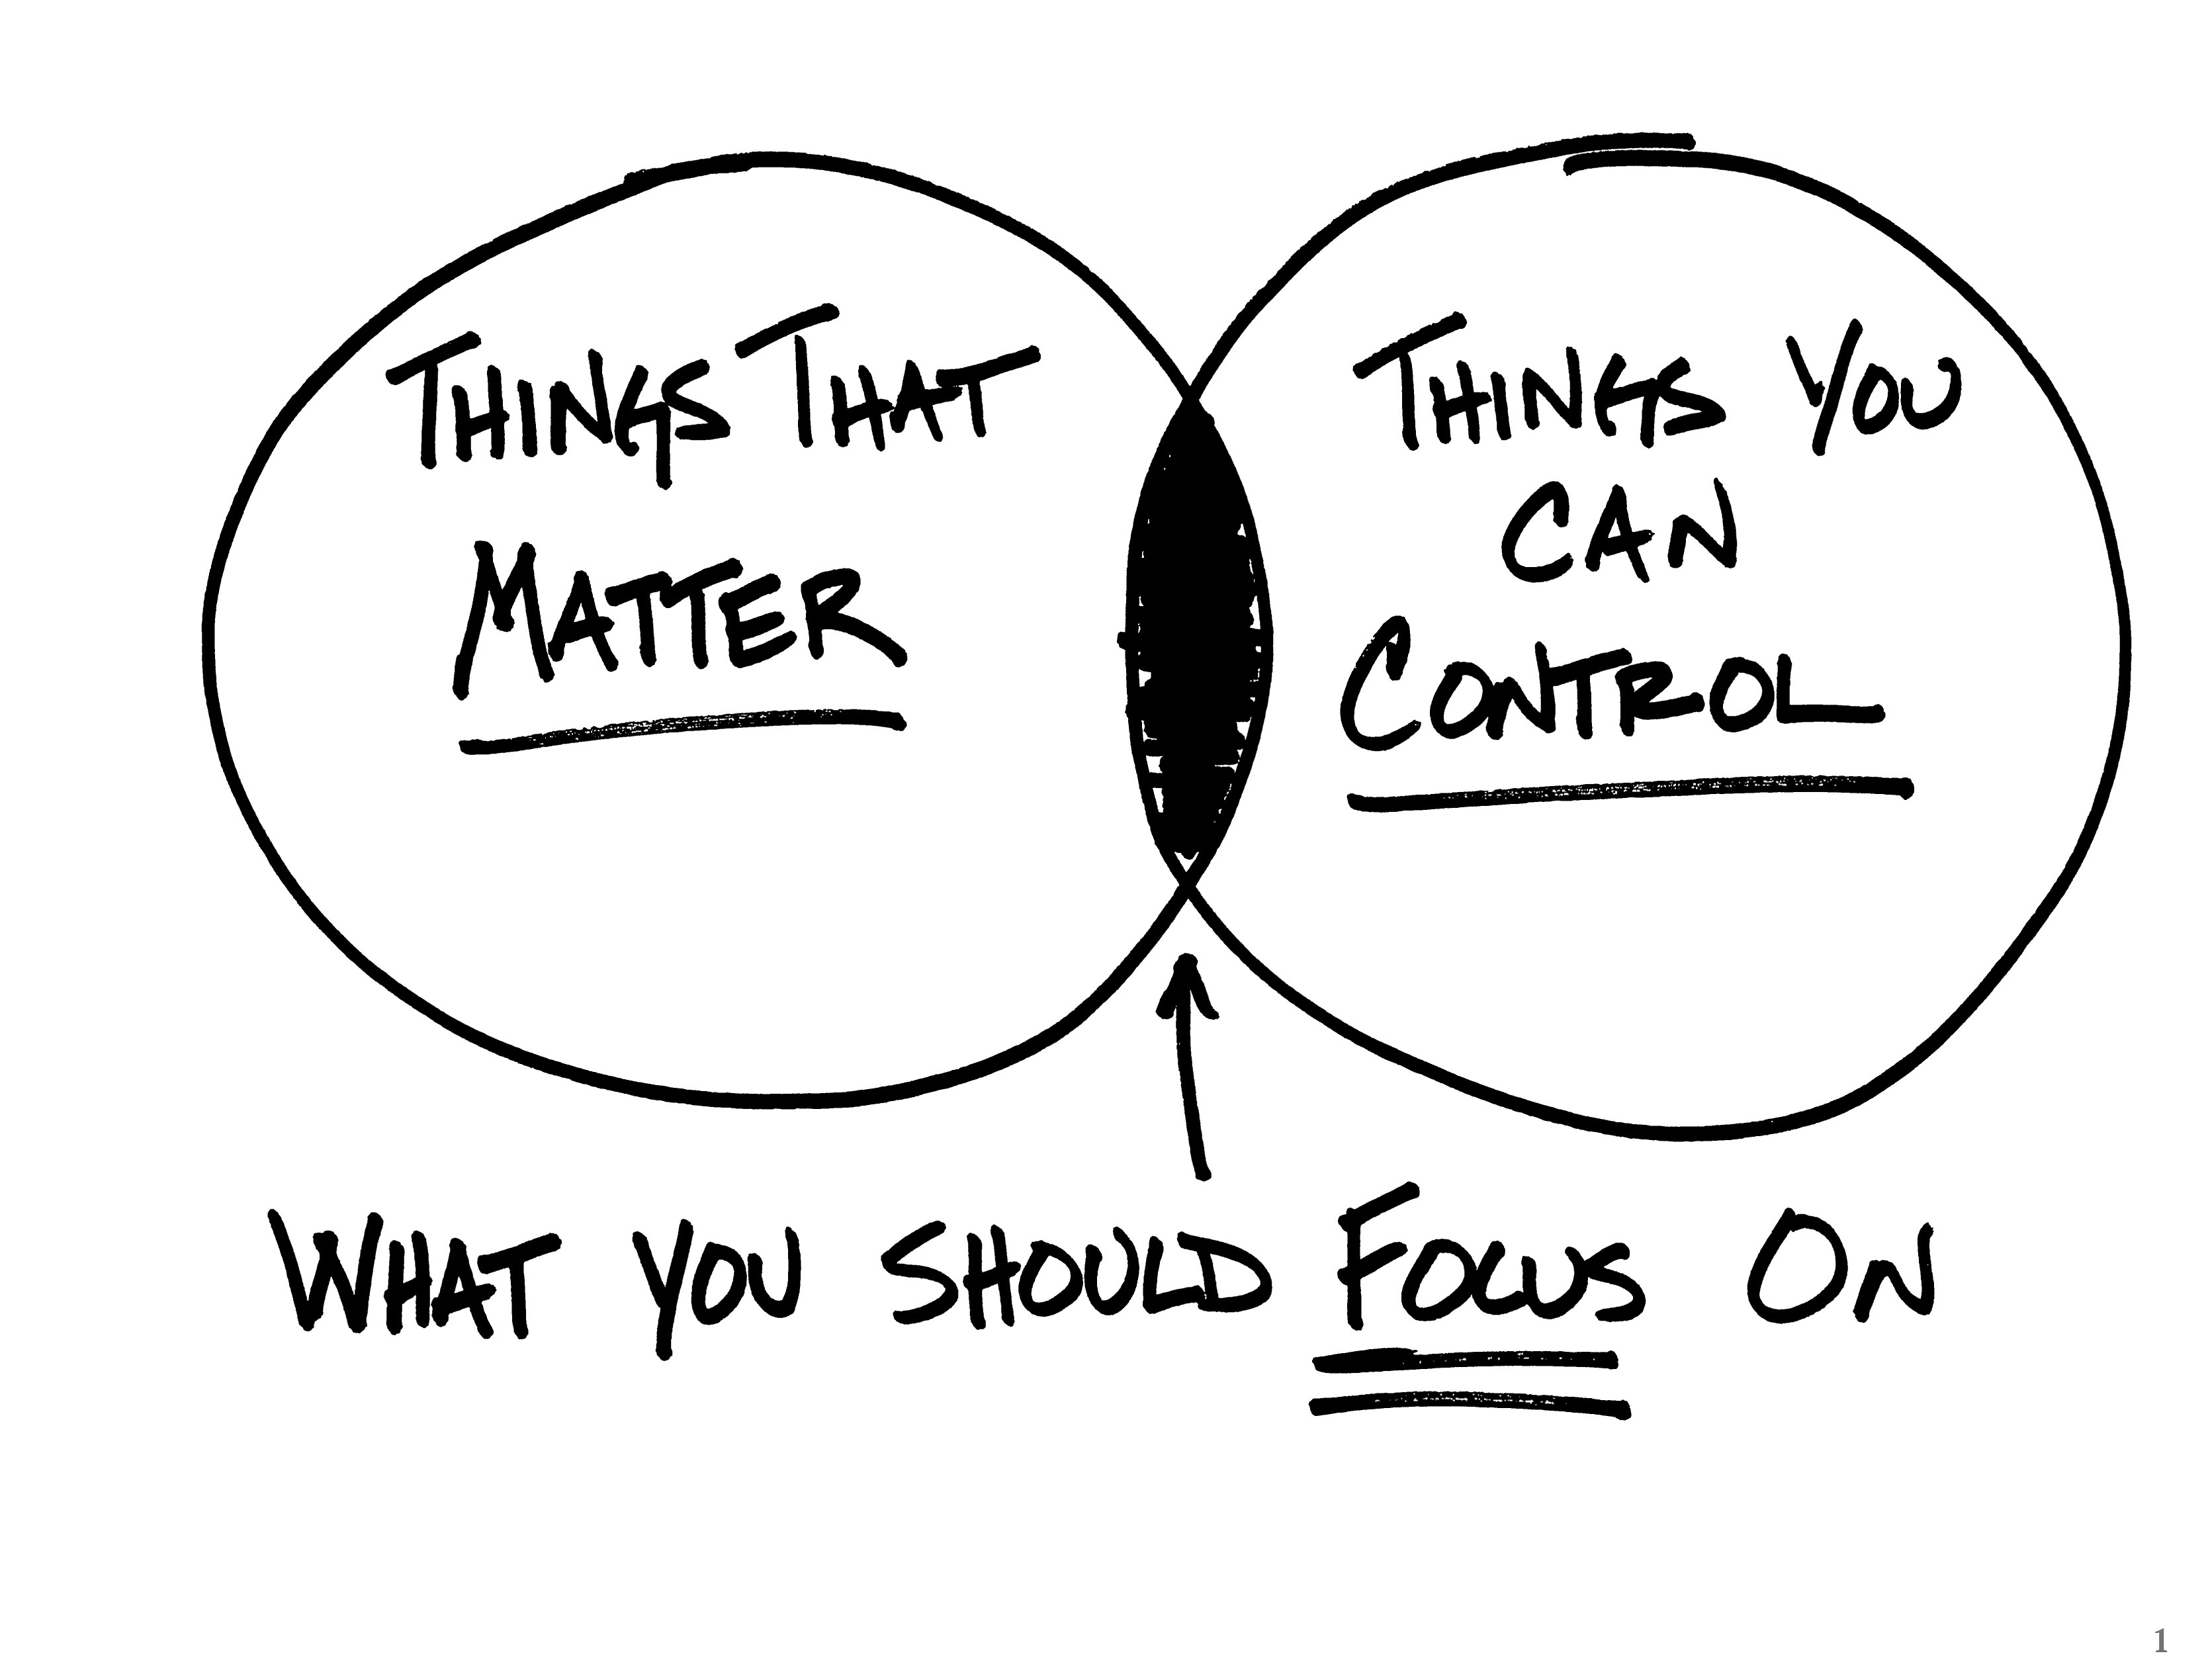 Focus on the things that matter